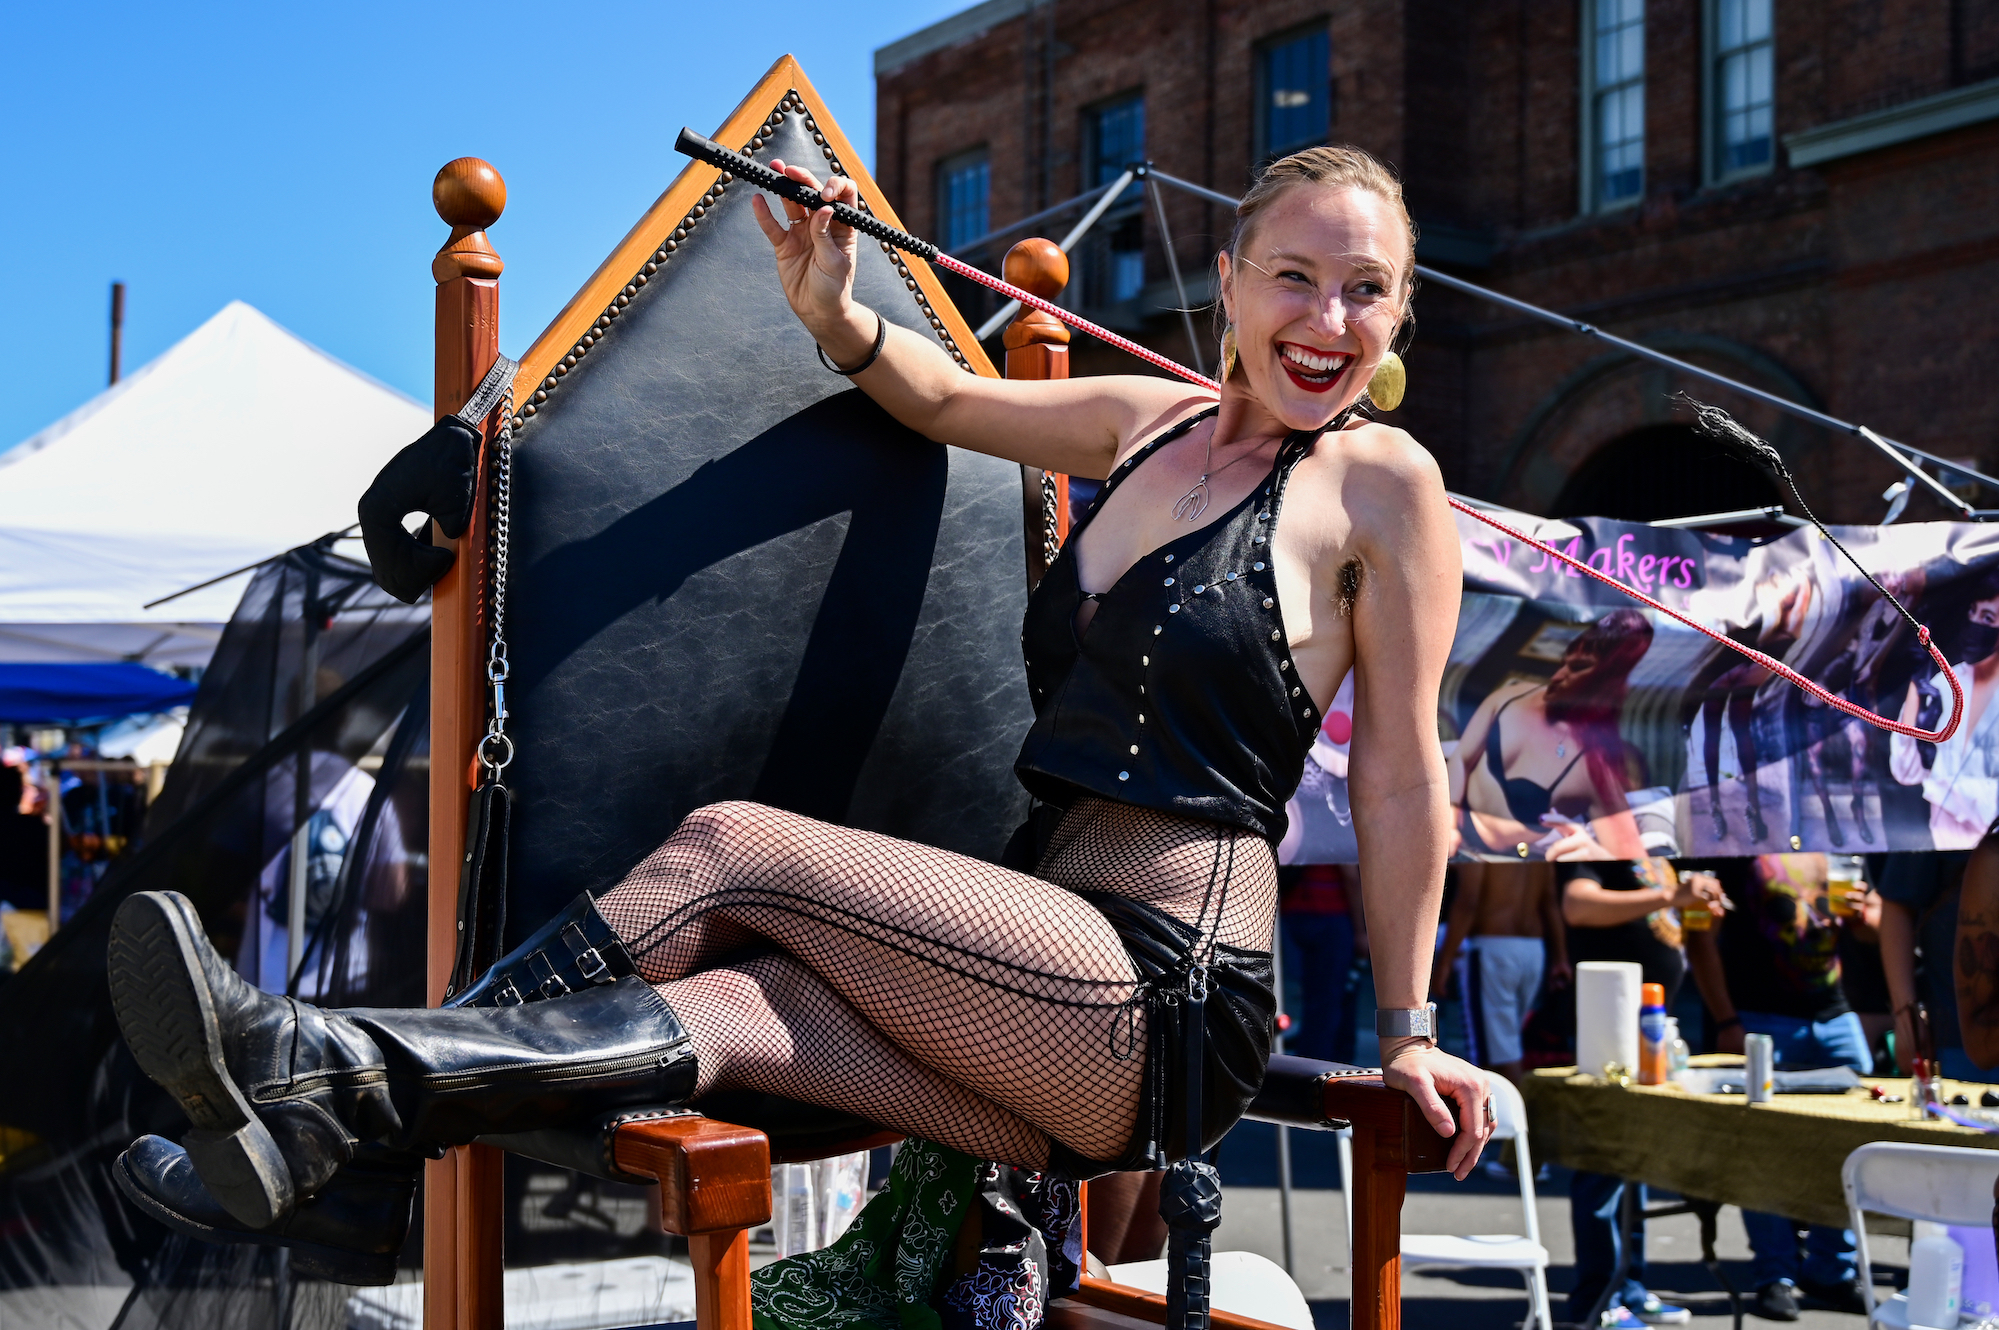 Kinky Street Fair, Martial Arts Fest and Other Free Events in San Francisco This Weekend